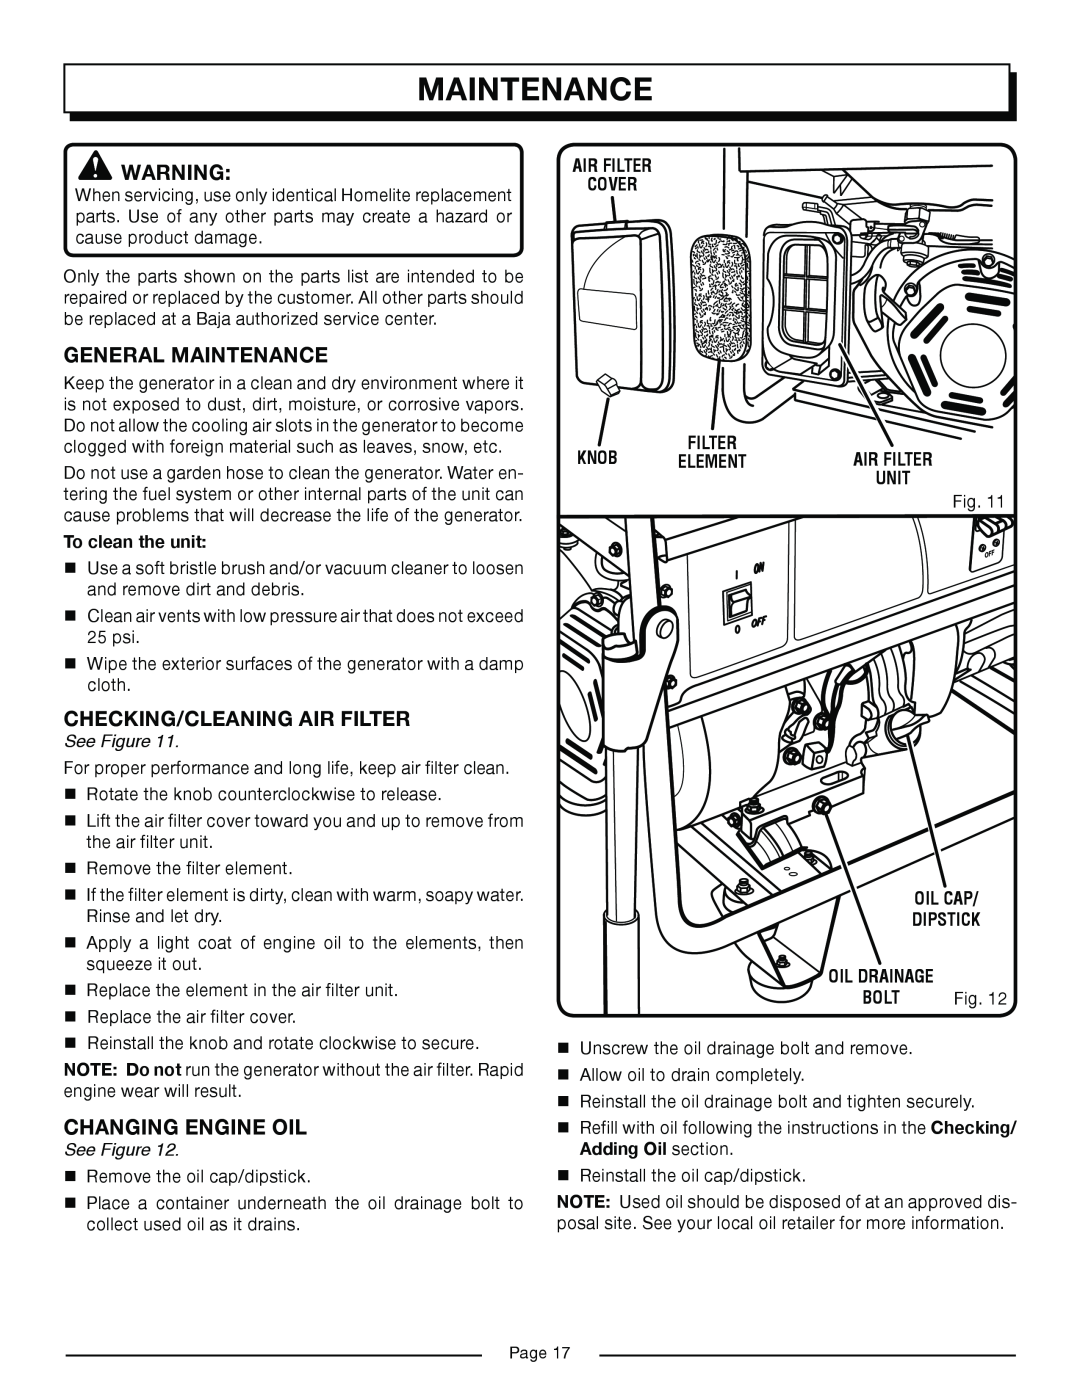 Homelite HG6000 manual General Maintenance, Checking/Cleaning Air Filter, Changing Engine Oil, See Figure 